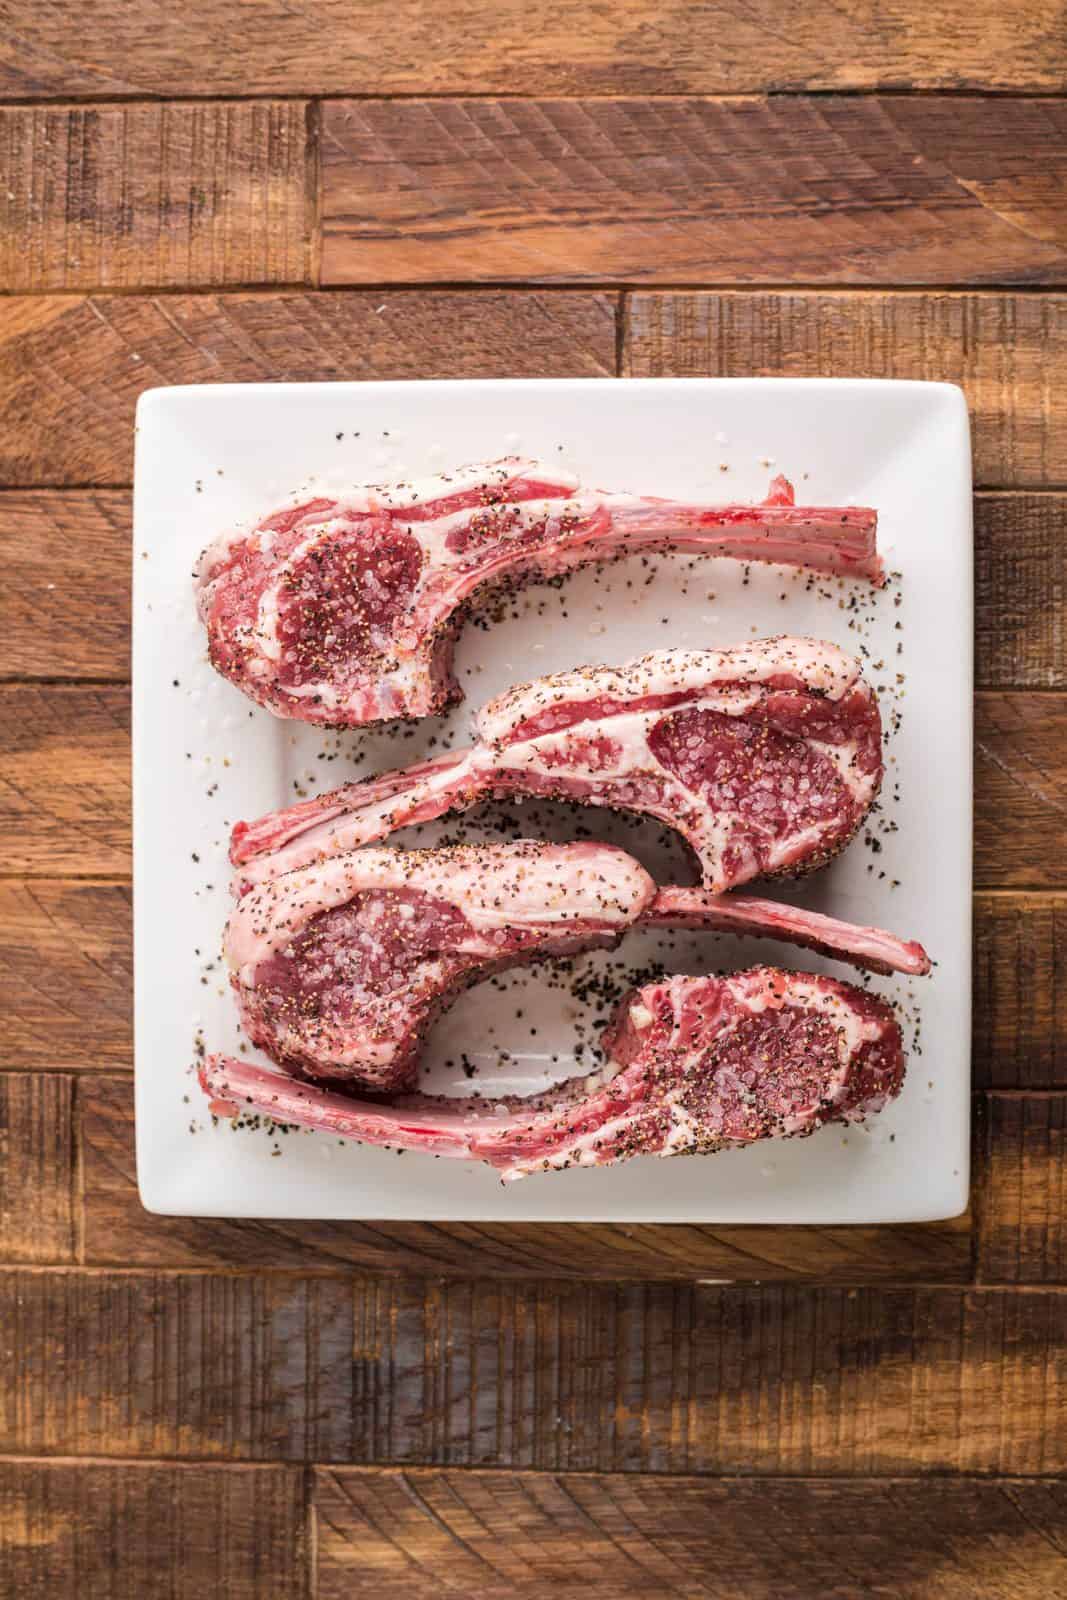 Lamb chops sprinkled with salt and pepper.